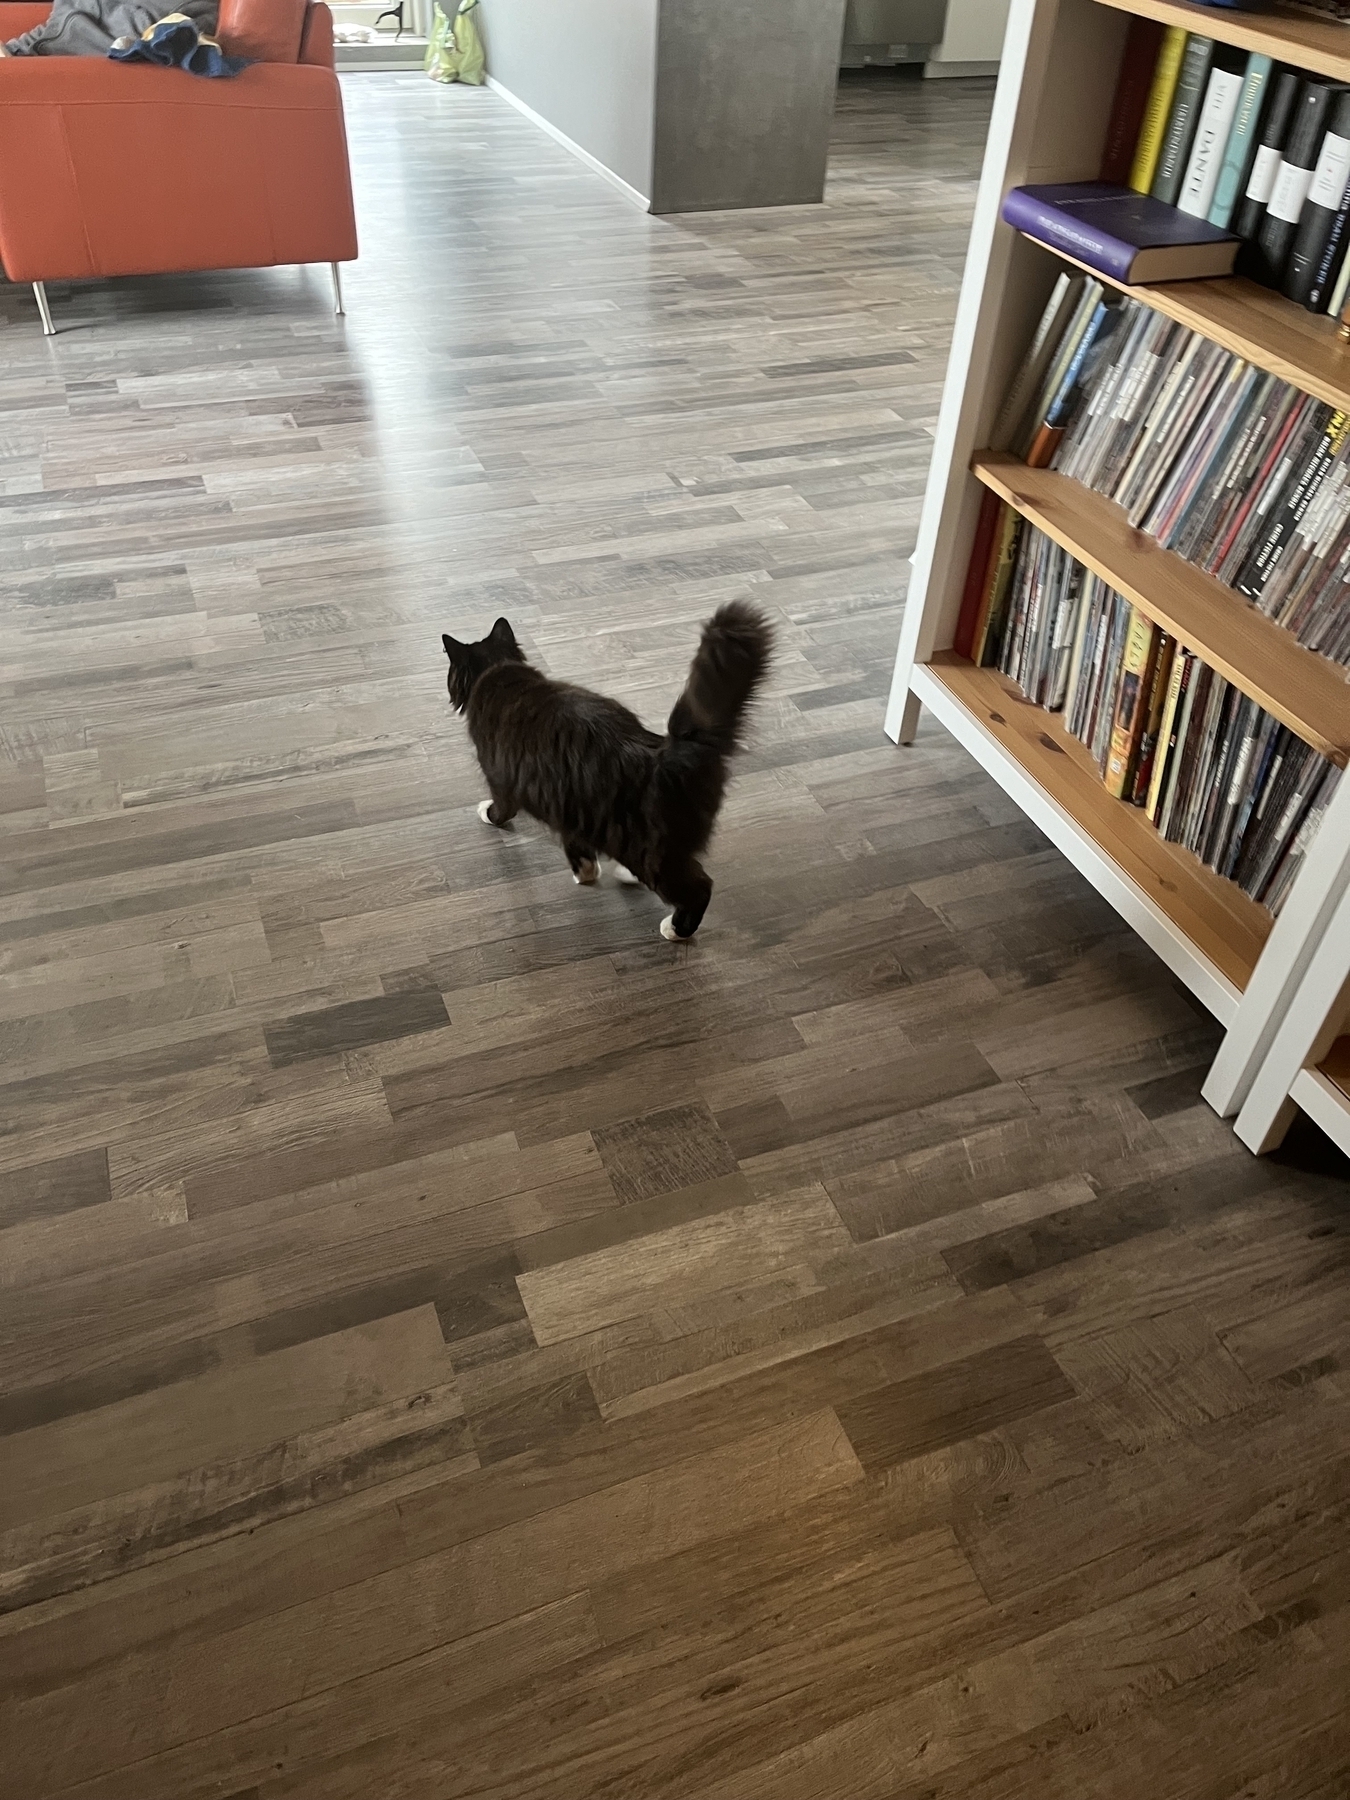 The neighbour cat walks past my comics library on her inspection tour